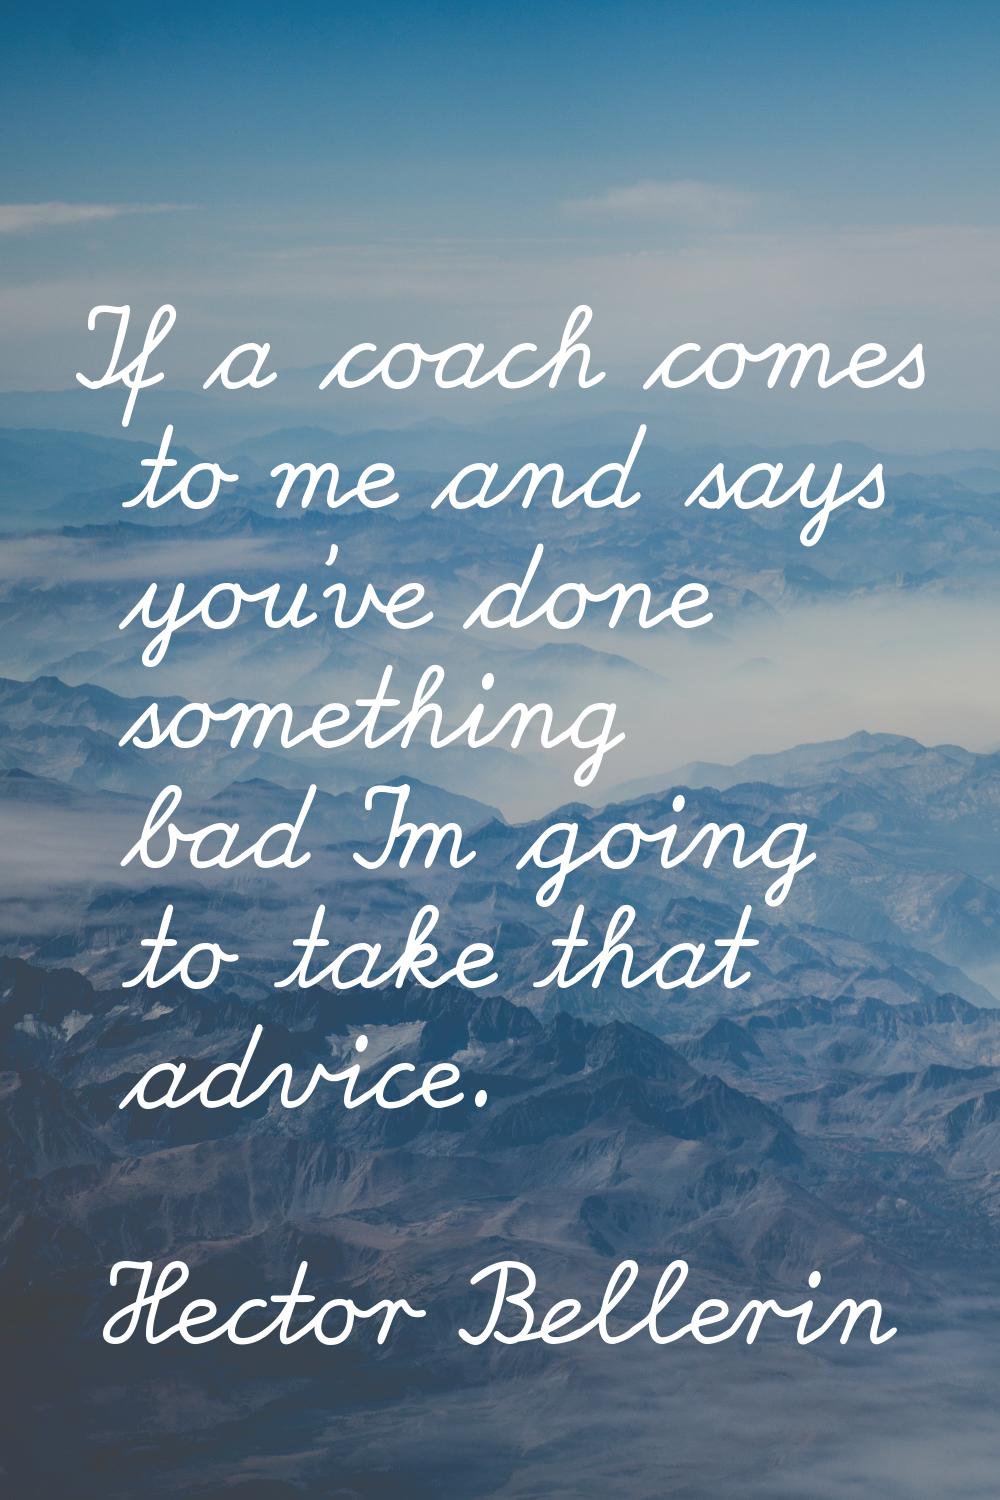 If a coach comes to me and says you've done something bad I'm going to take that advice.